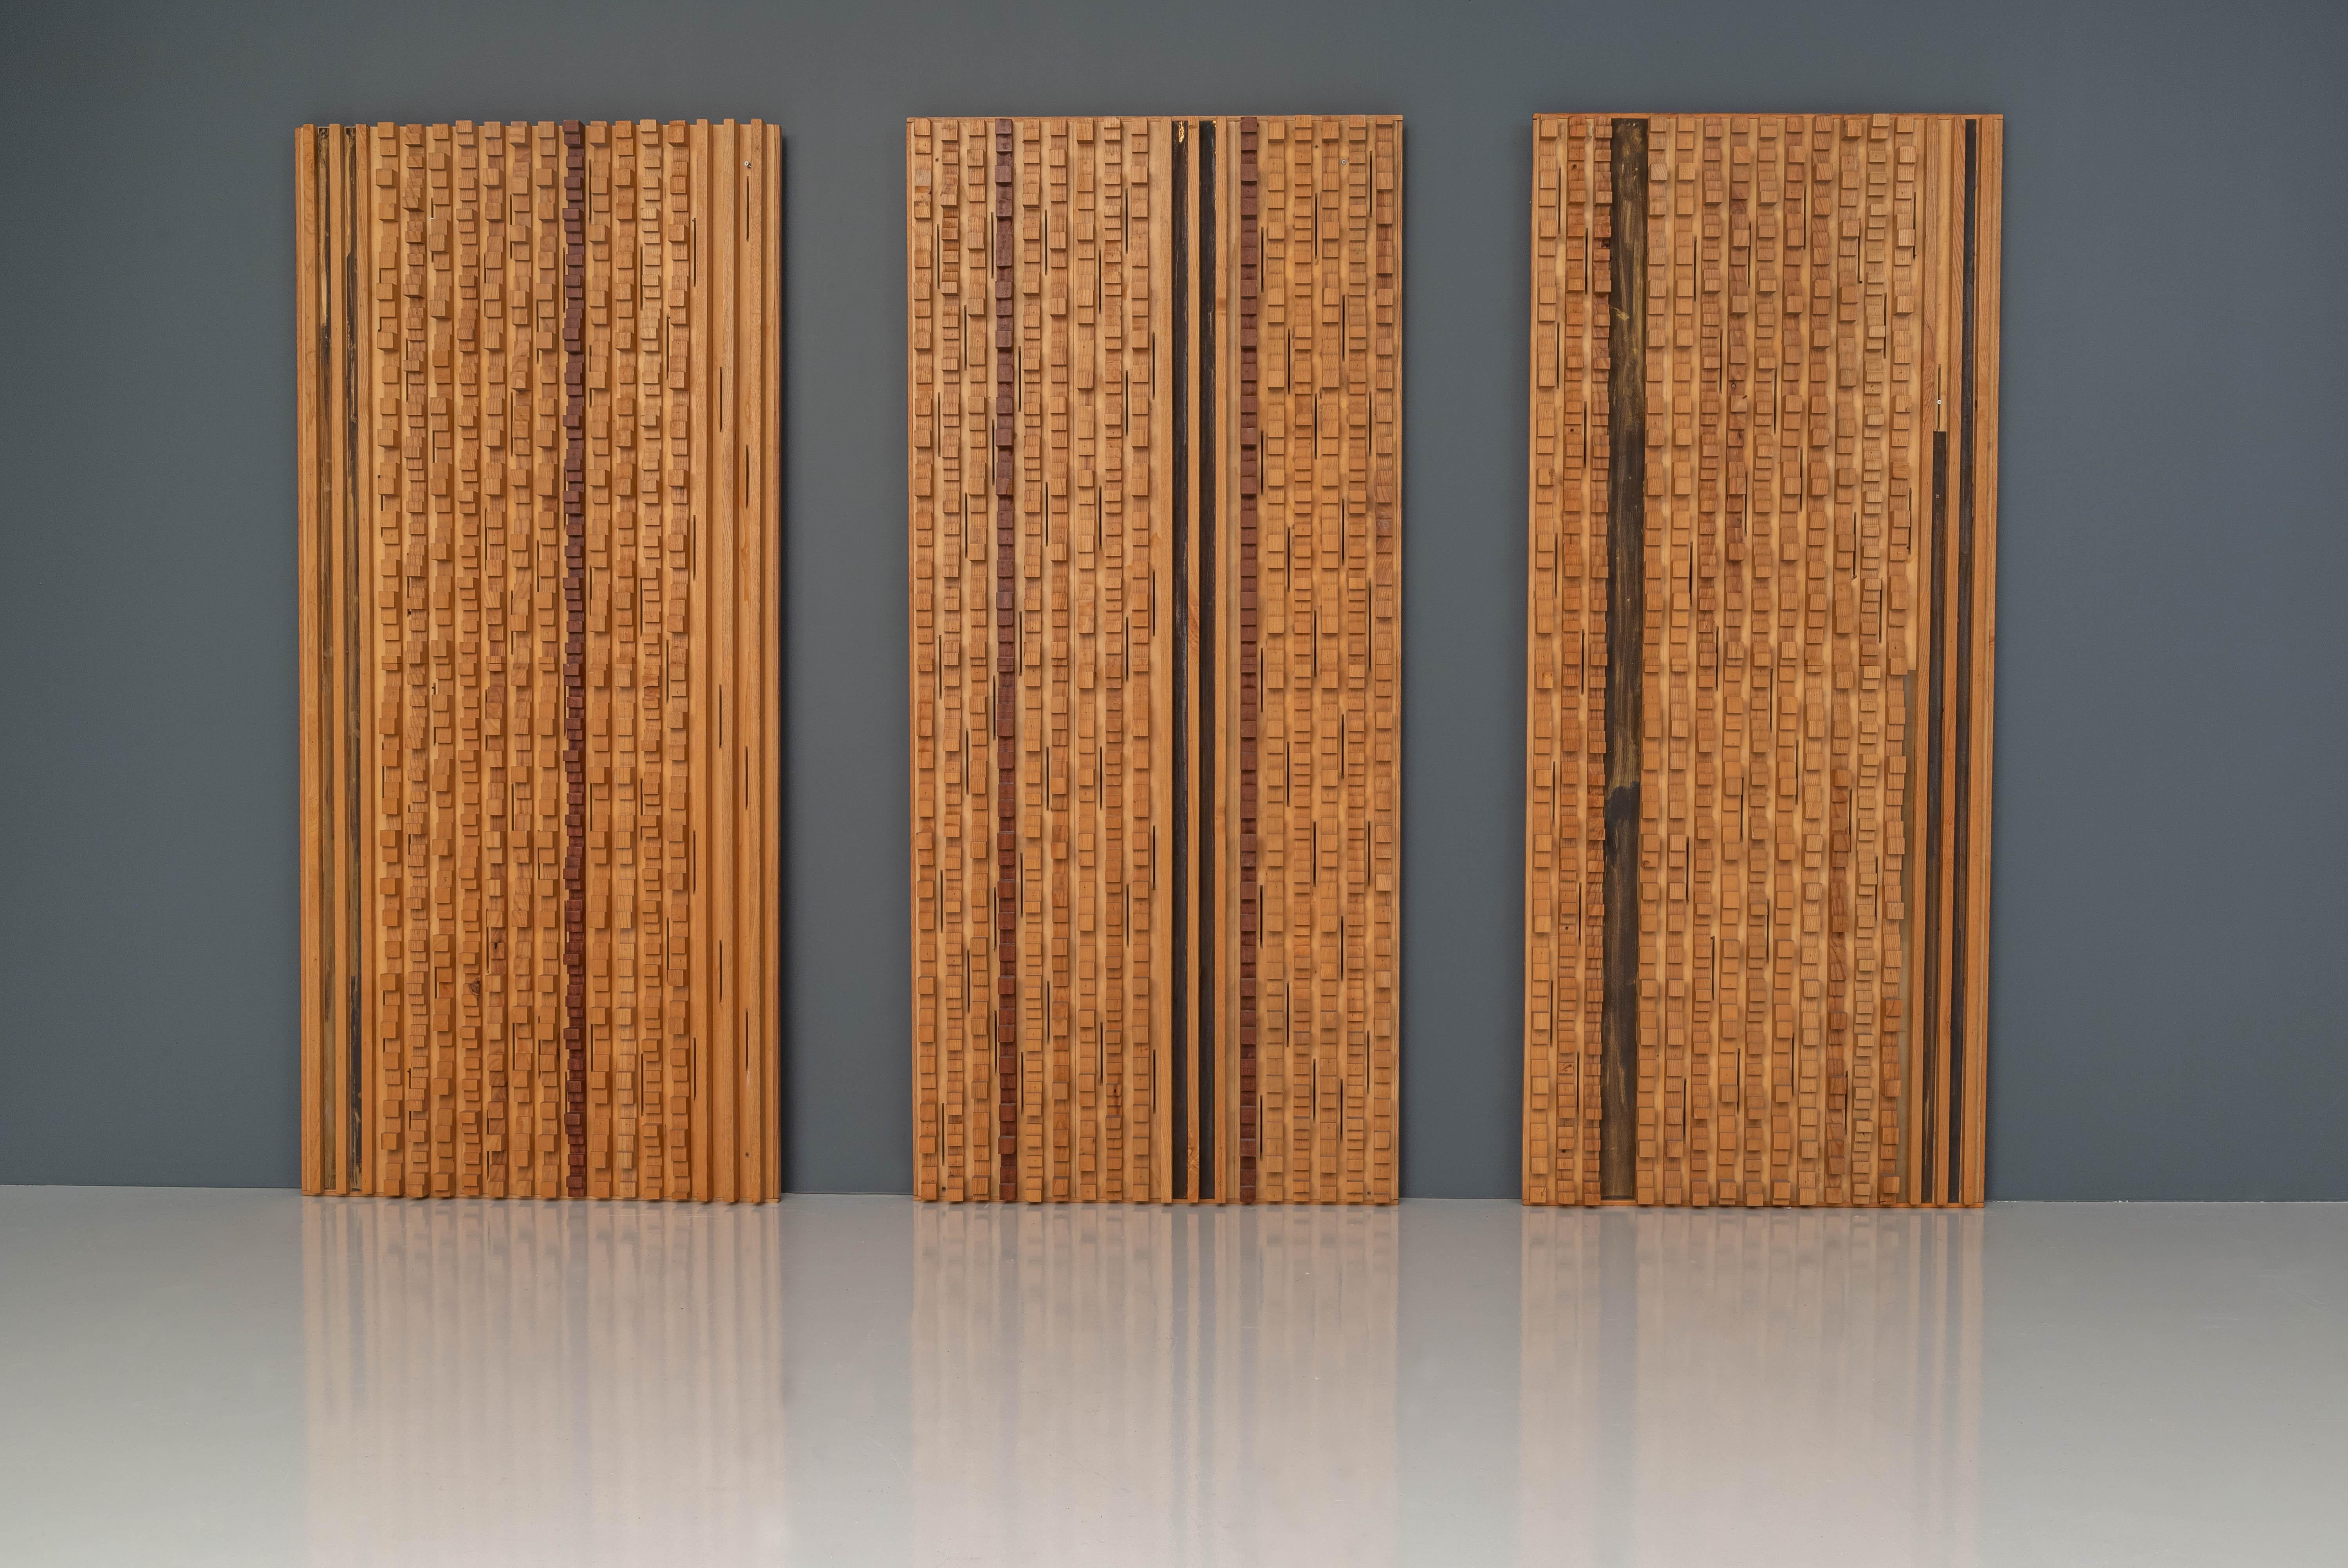 Set of Three Large Wall Panels by Stefano d'Amico, Italy, 1974 For Sale 2